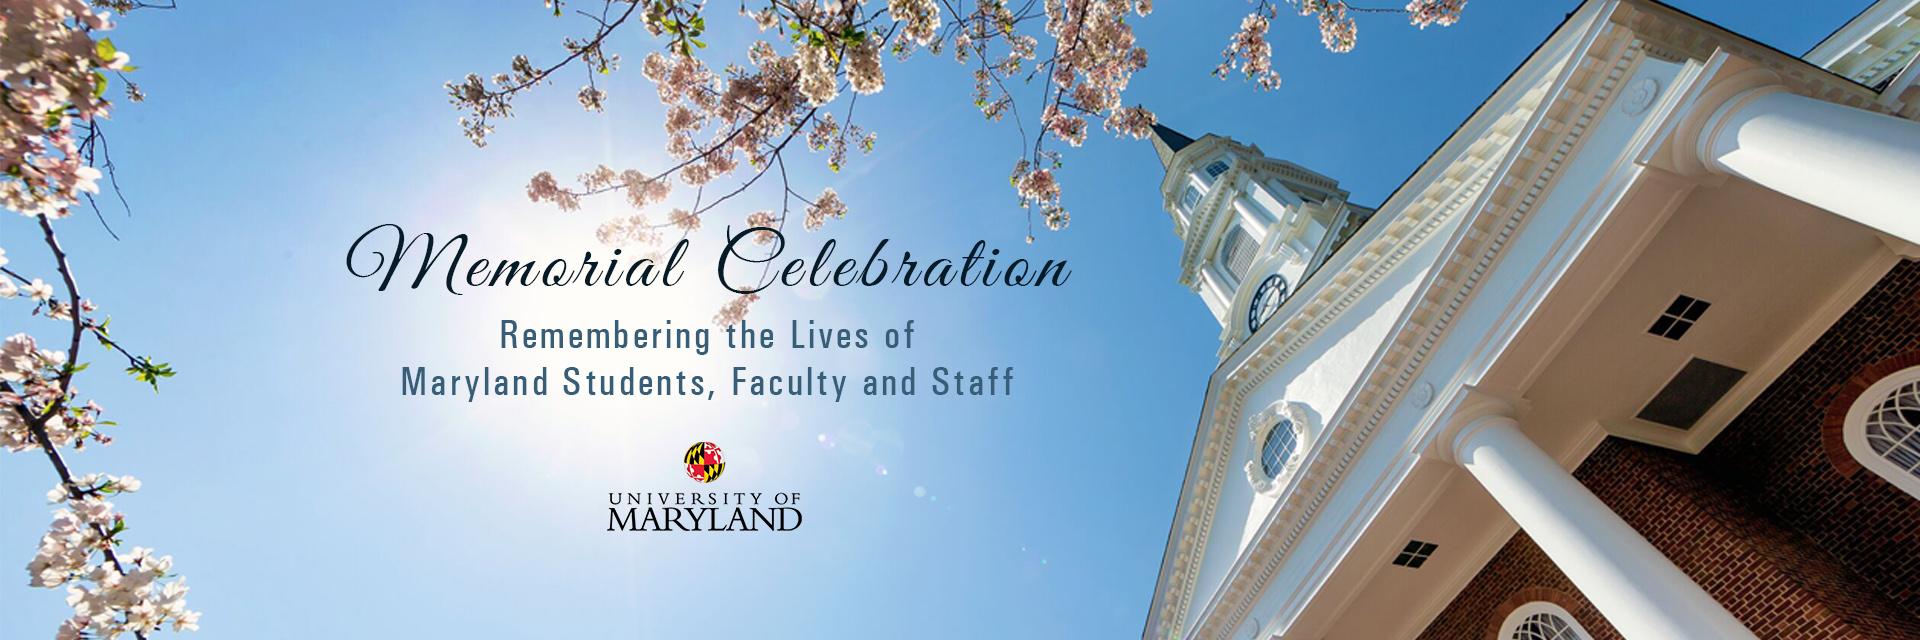 Memorial Celebration Remembering the lives of Maryland Students, Faculty and Staff